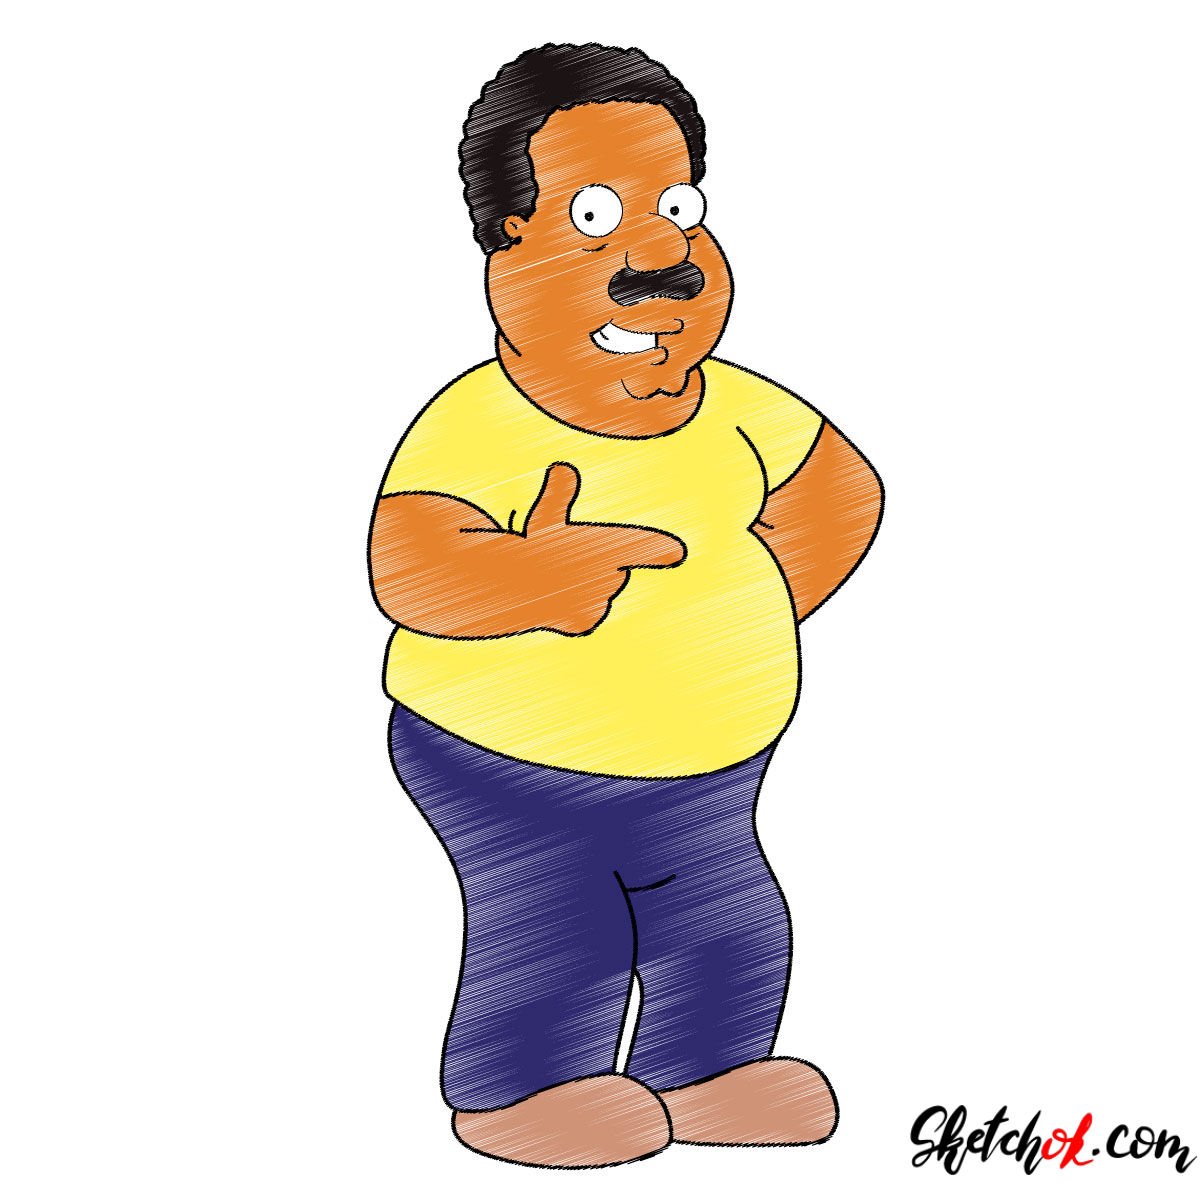 How to draw Cleveland Brown